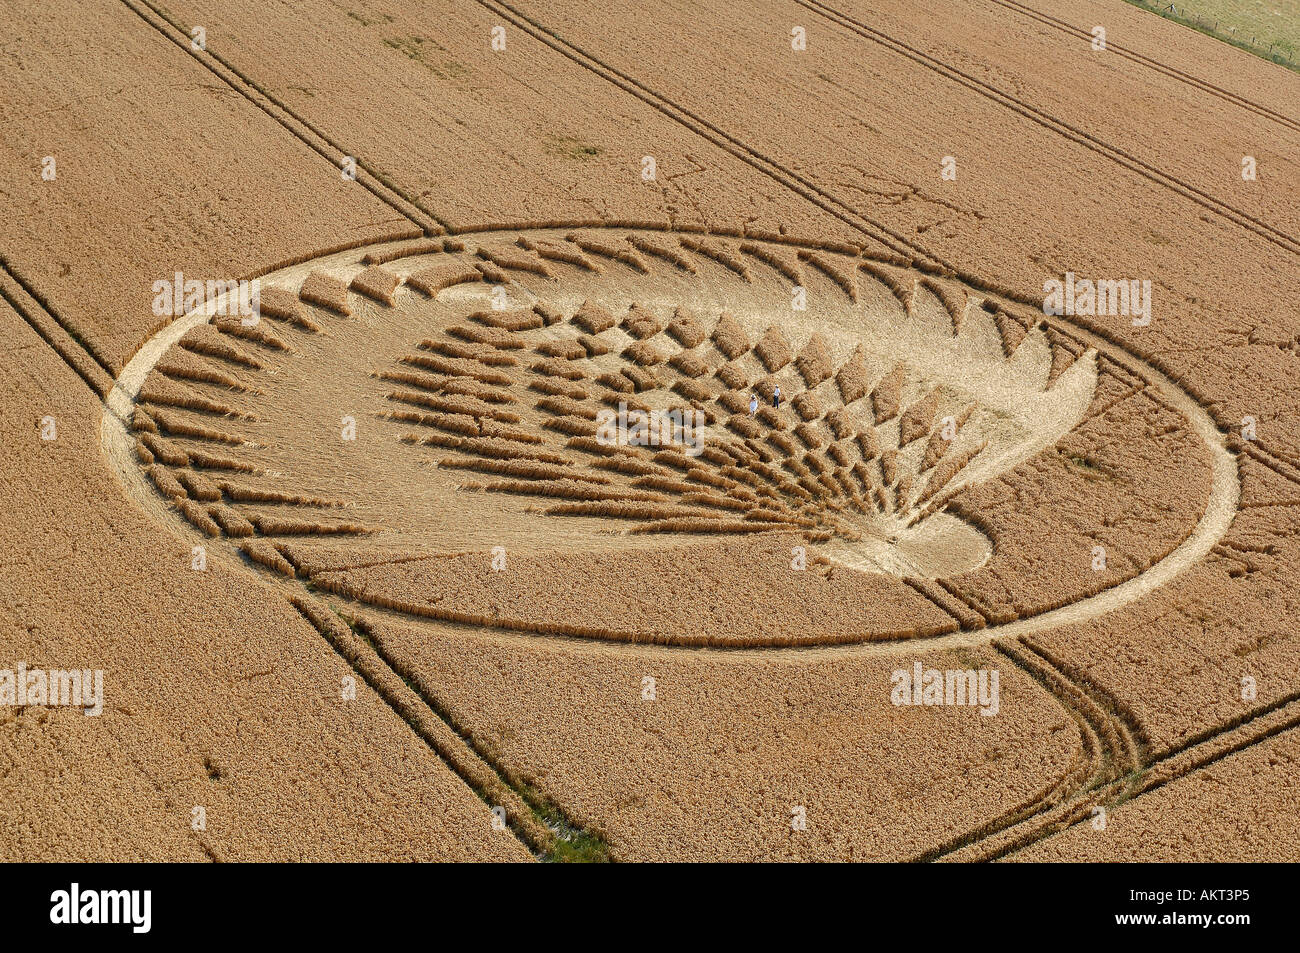 Crop circles in Wiltshire South West England Stock Photo